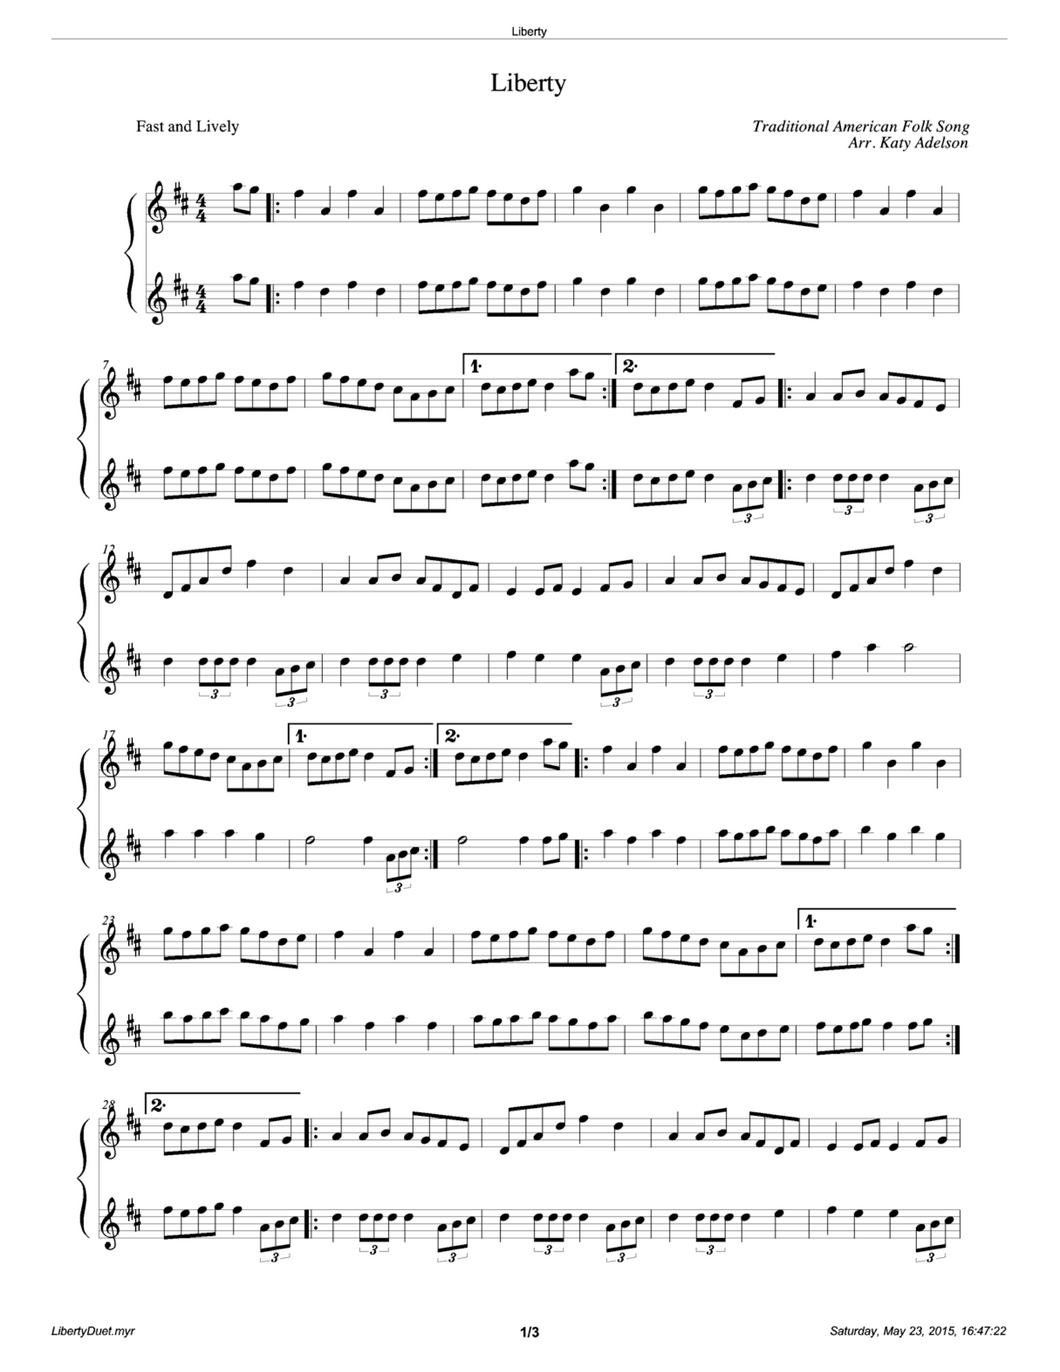 Liberty Violin Duet Sheet Music - Arranged by Katy Adelson